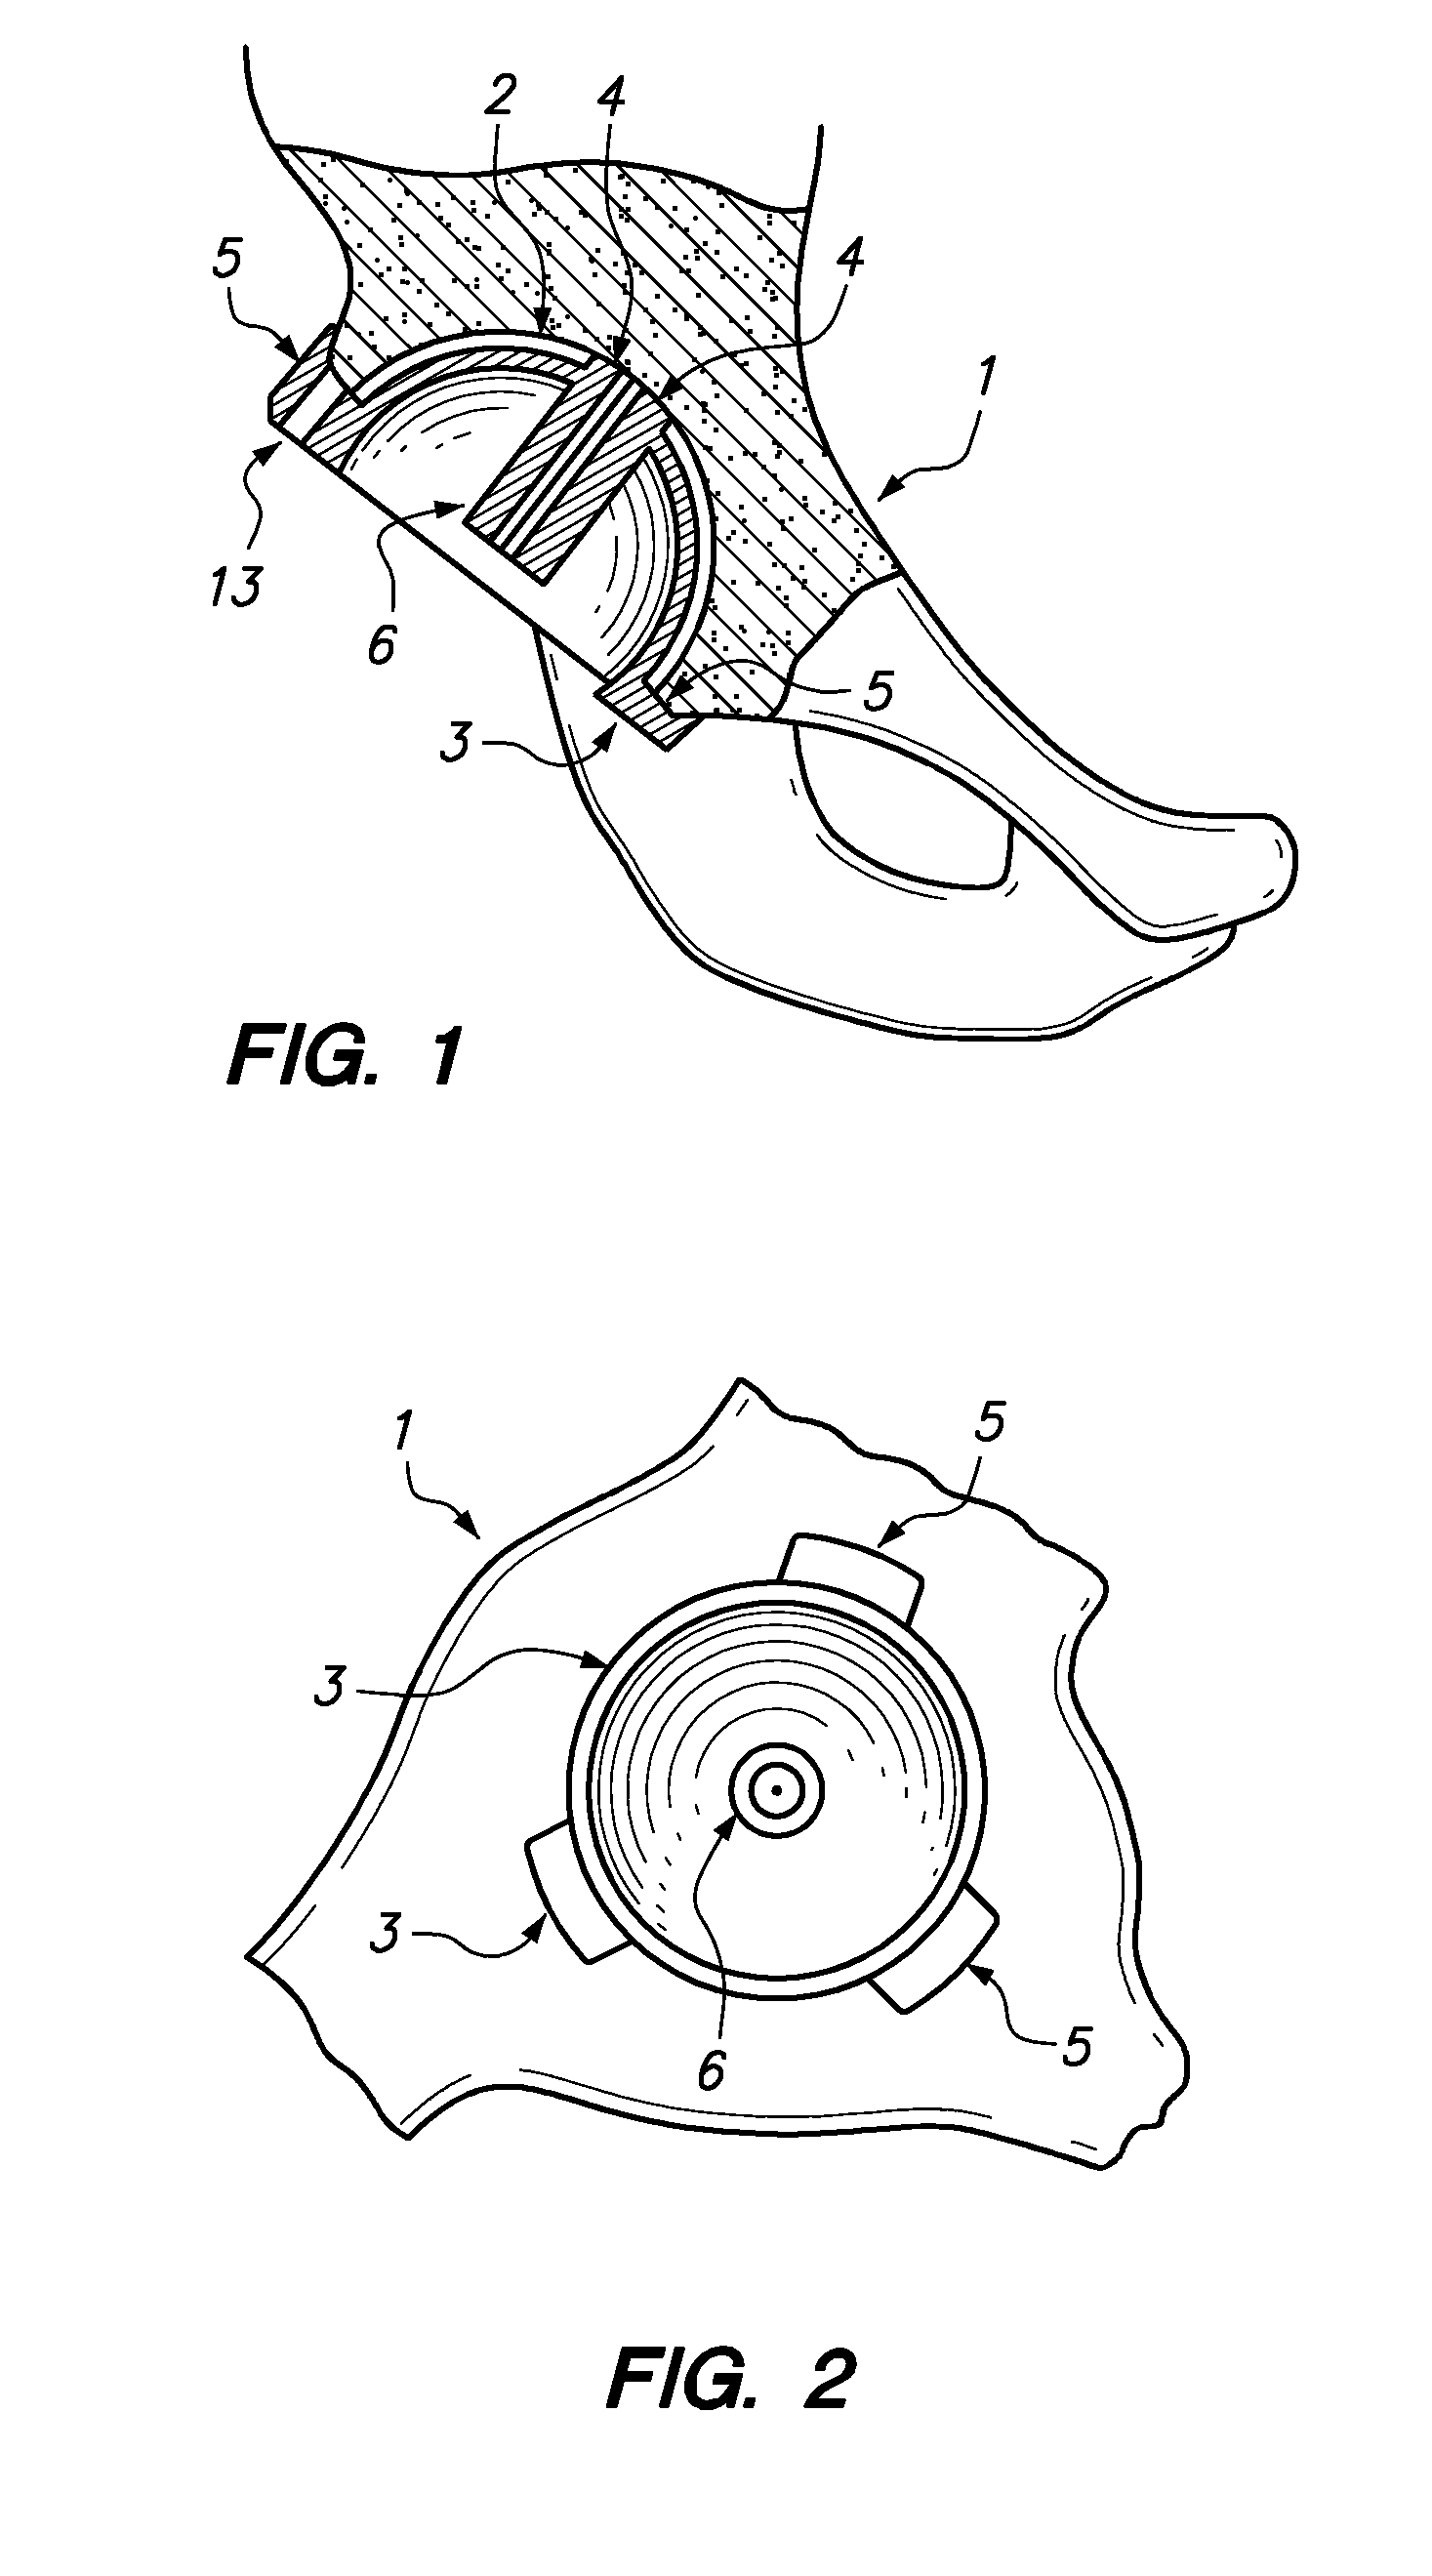 Device and method for achieving accurate positioning of acetabular cup during total hip replacement